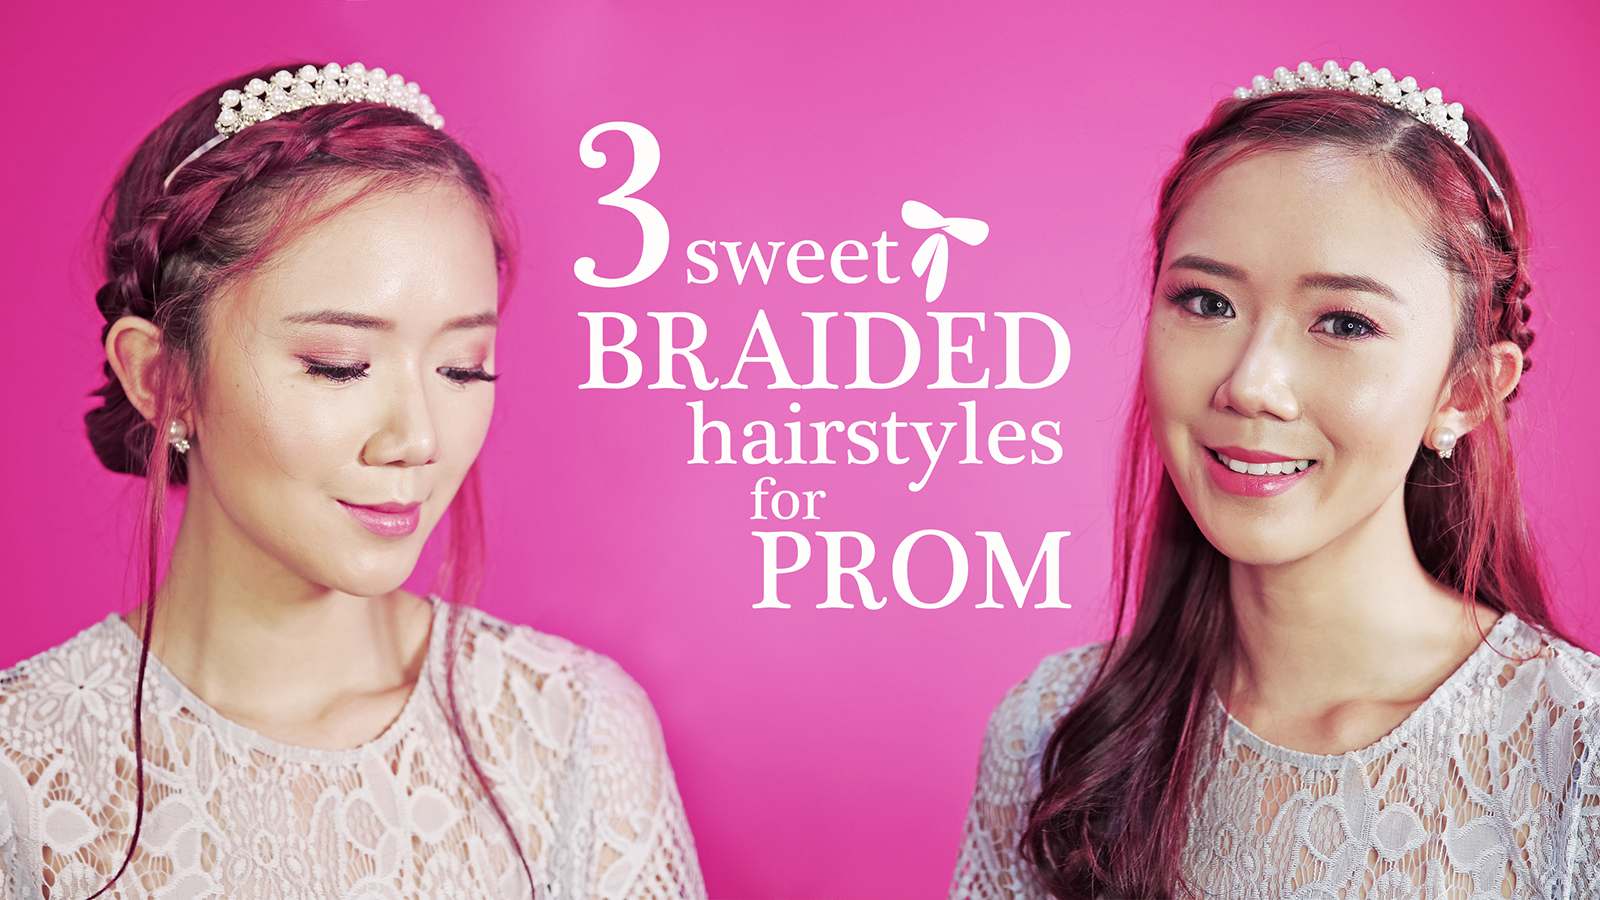 Braided Hairstyle For Prom - www.itscamilleco.com